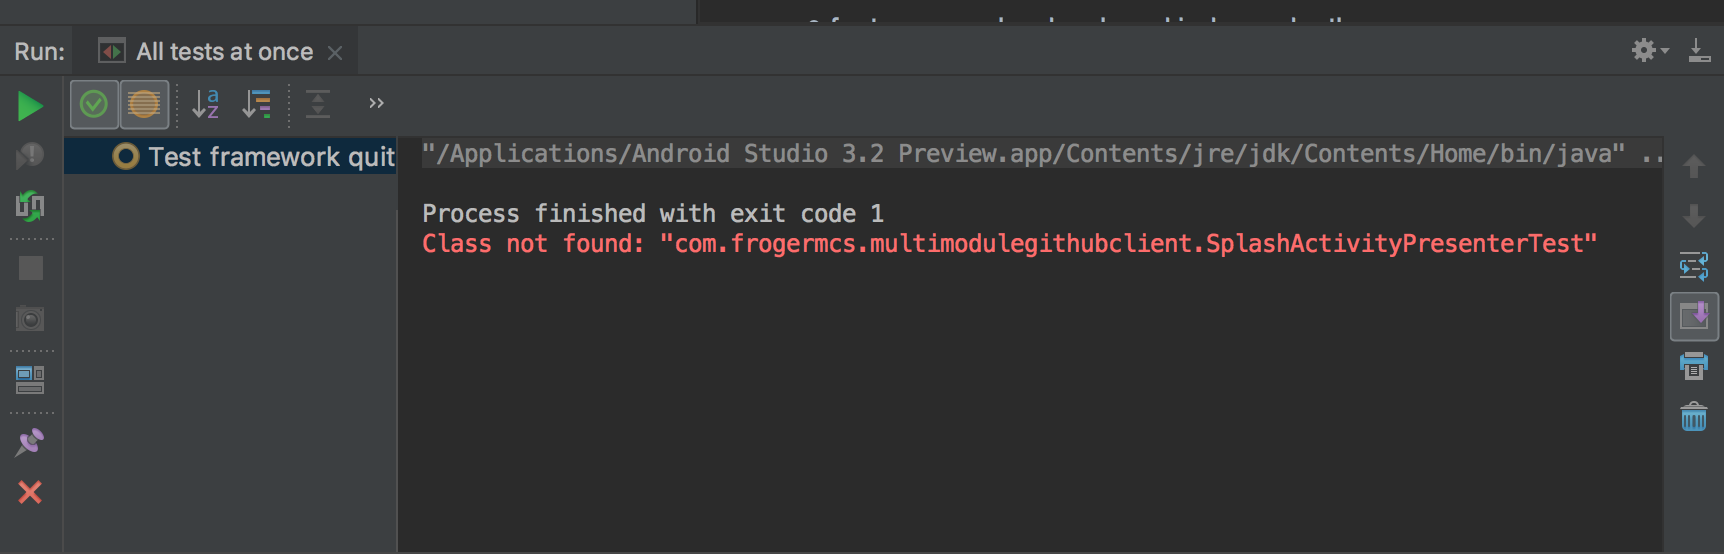 Android Studio issues